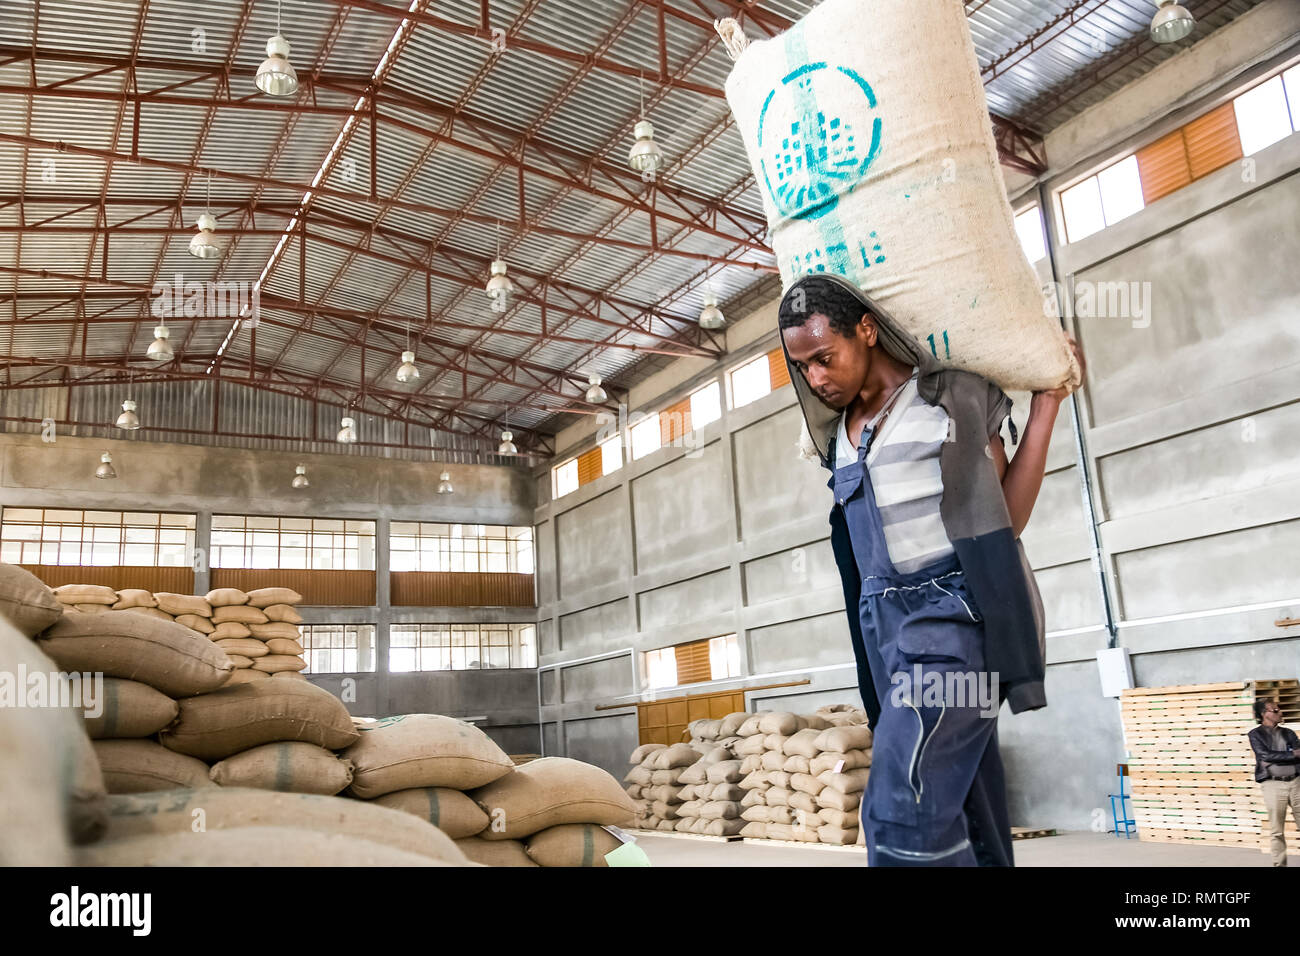 Addis Ababa, Ethiopia - January 30 2014: Men stacking large bags of coffee beans in a warehouse Stock Photo